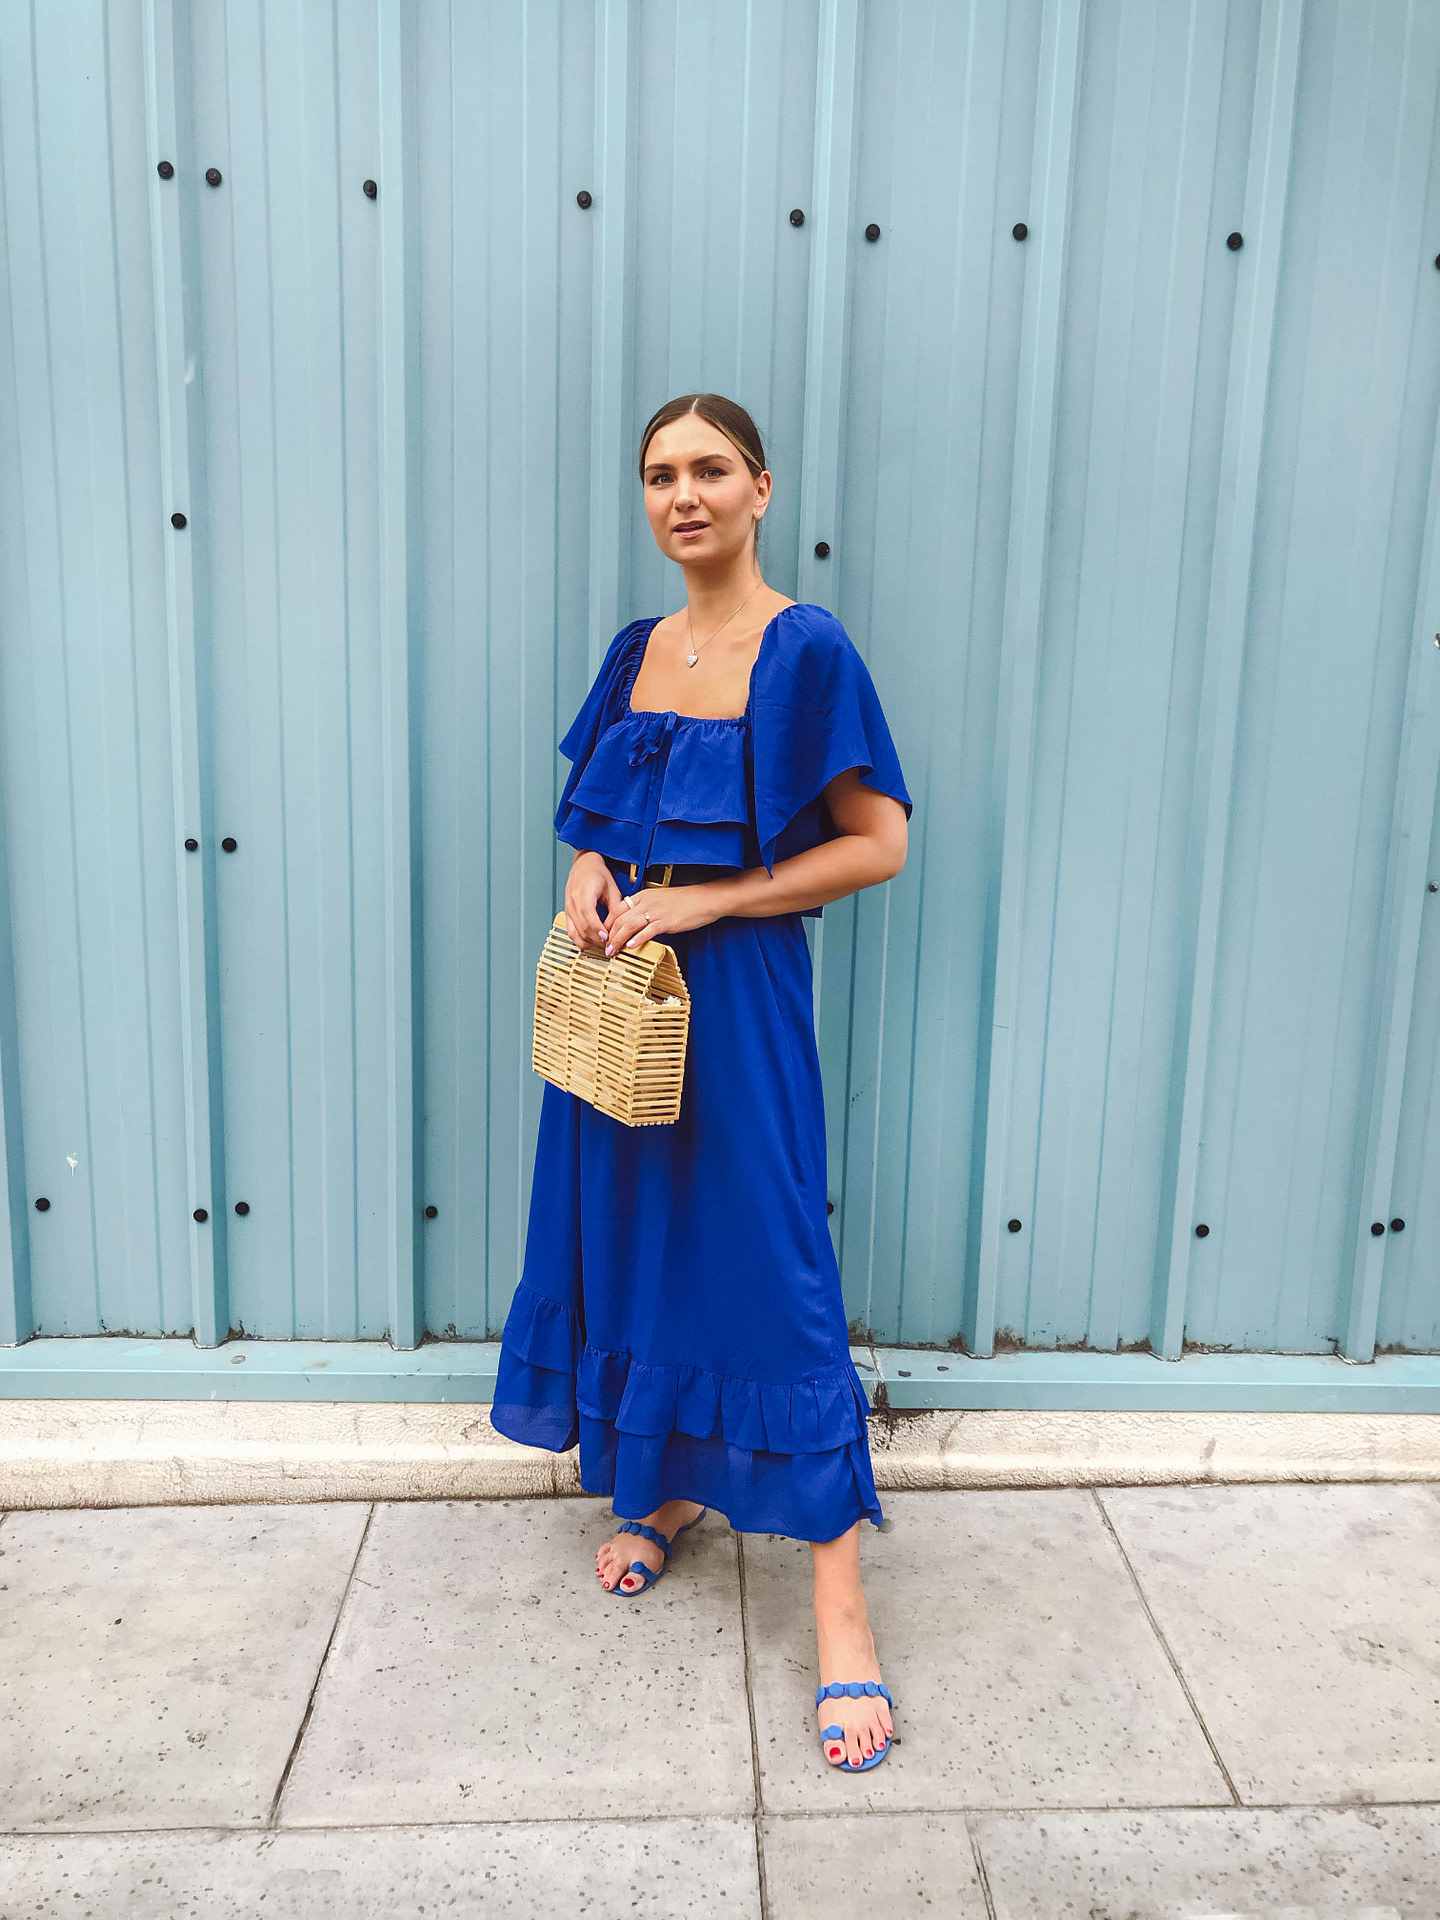 Summer Outfit Inspiration | The Blue Dress - The Simone Magazine